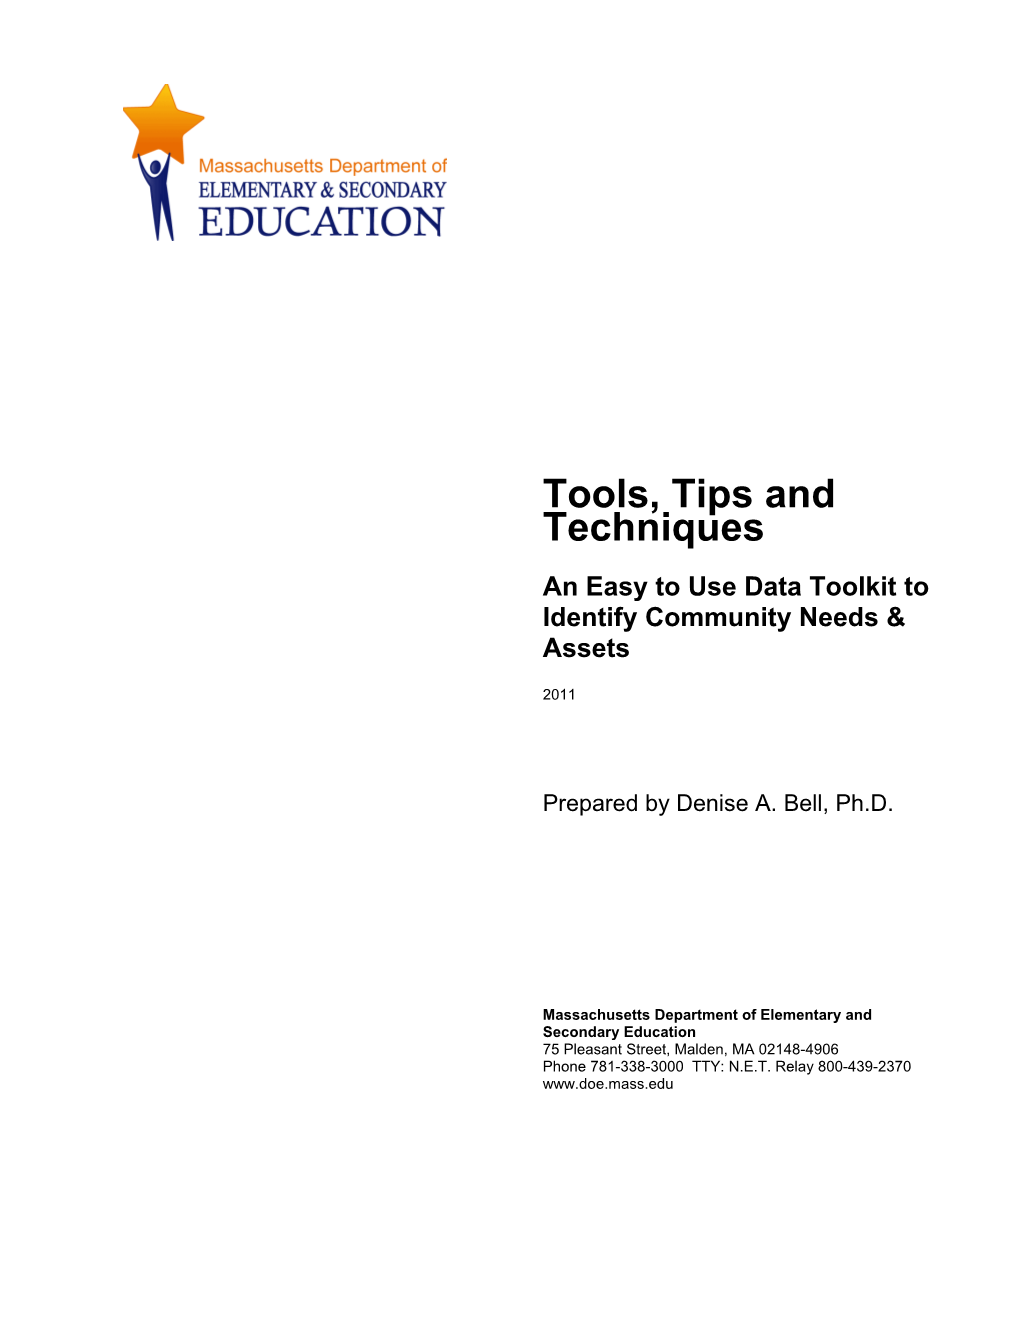 Tools, Tips and Techniques an Easy to Use Data Toolkit to Identify Community Needs & Assets